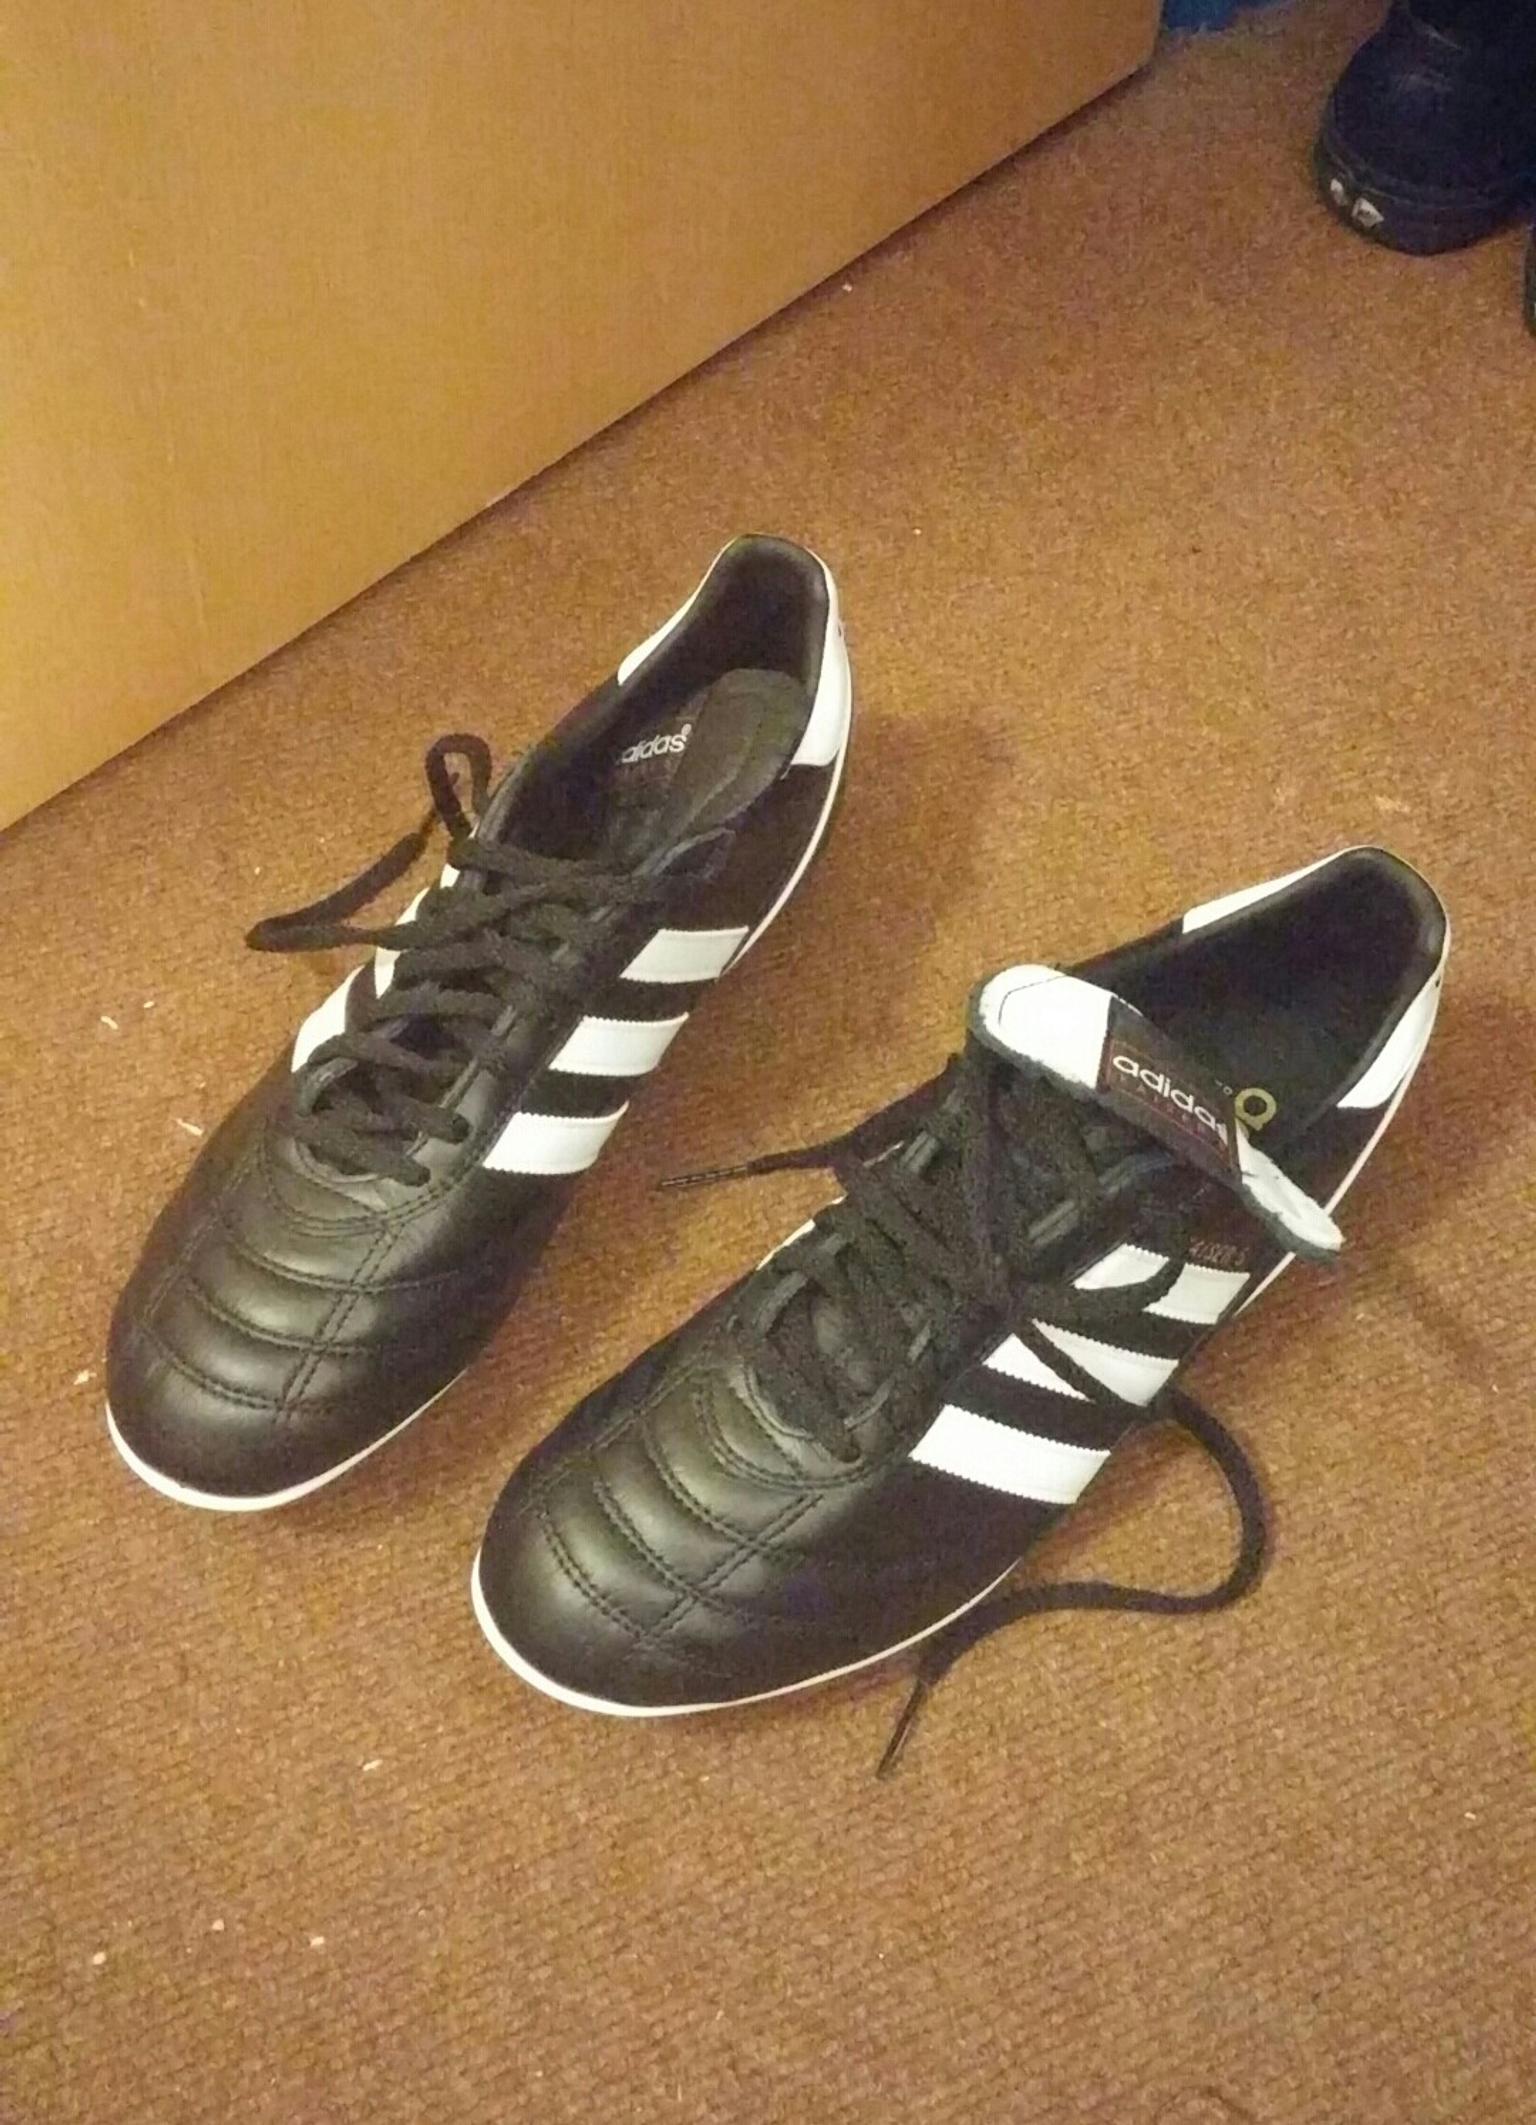 Adidas Kaiser 5 Size 9 UK FG Boots in EN2 Enfield for £35.00 for sale |  Shpock